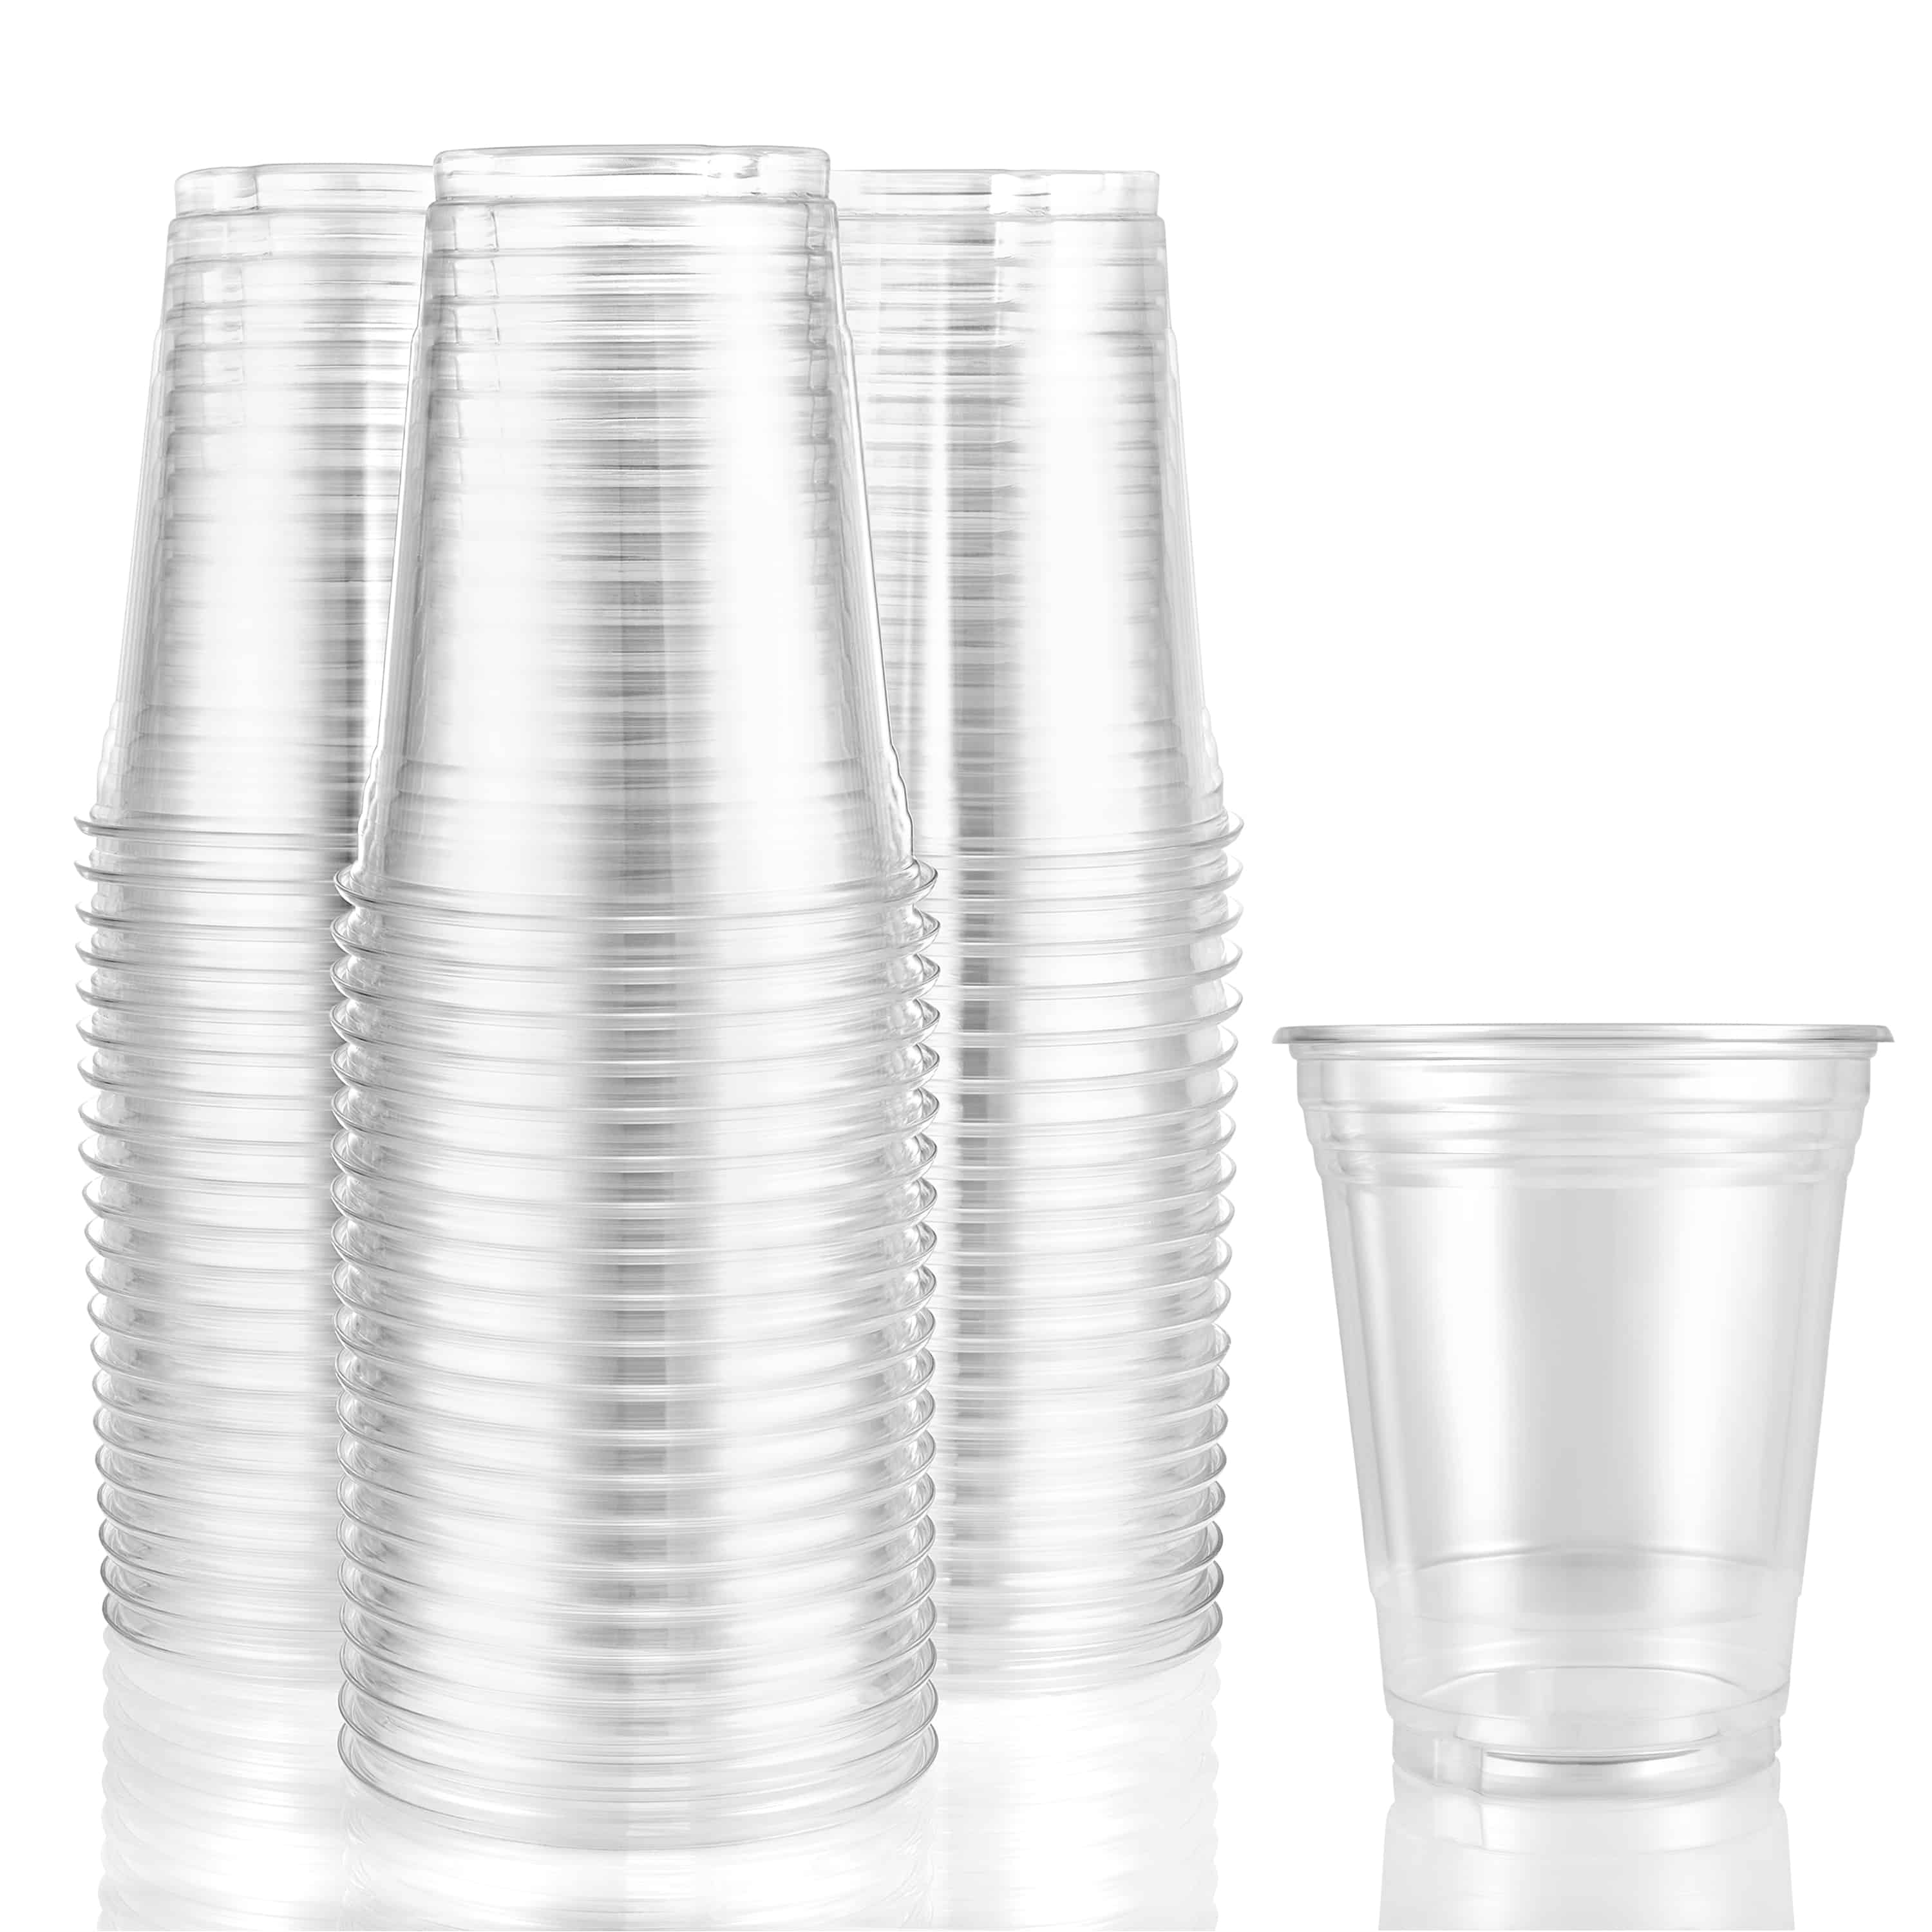 16 oz. aluminum cups set with different color party cup